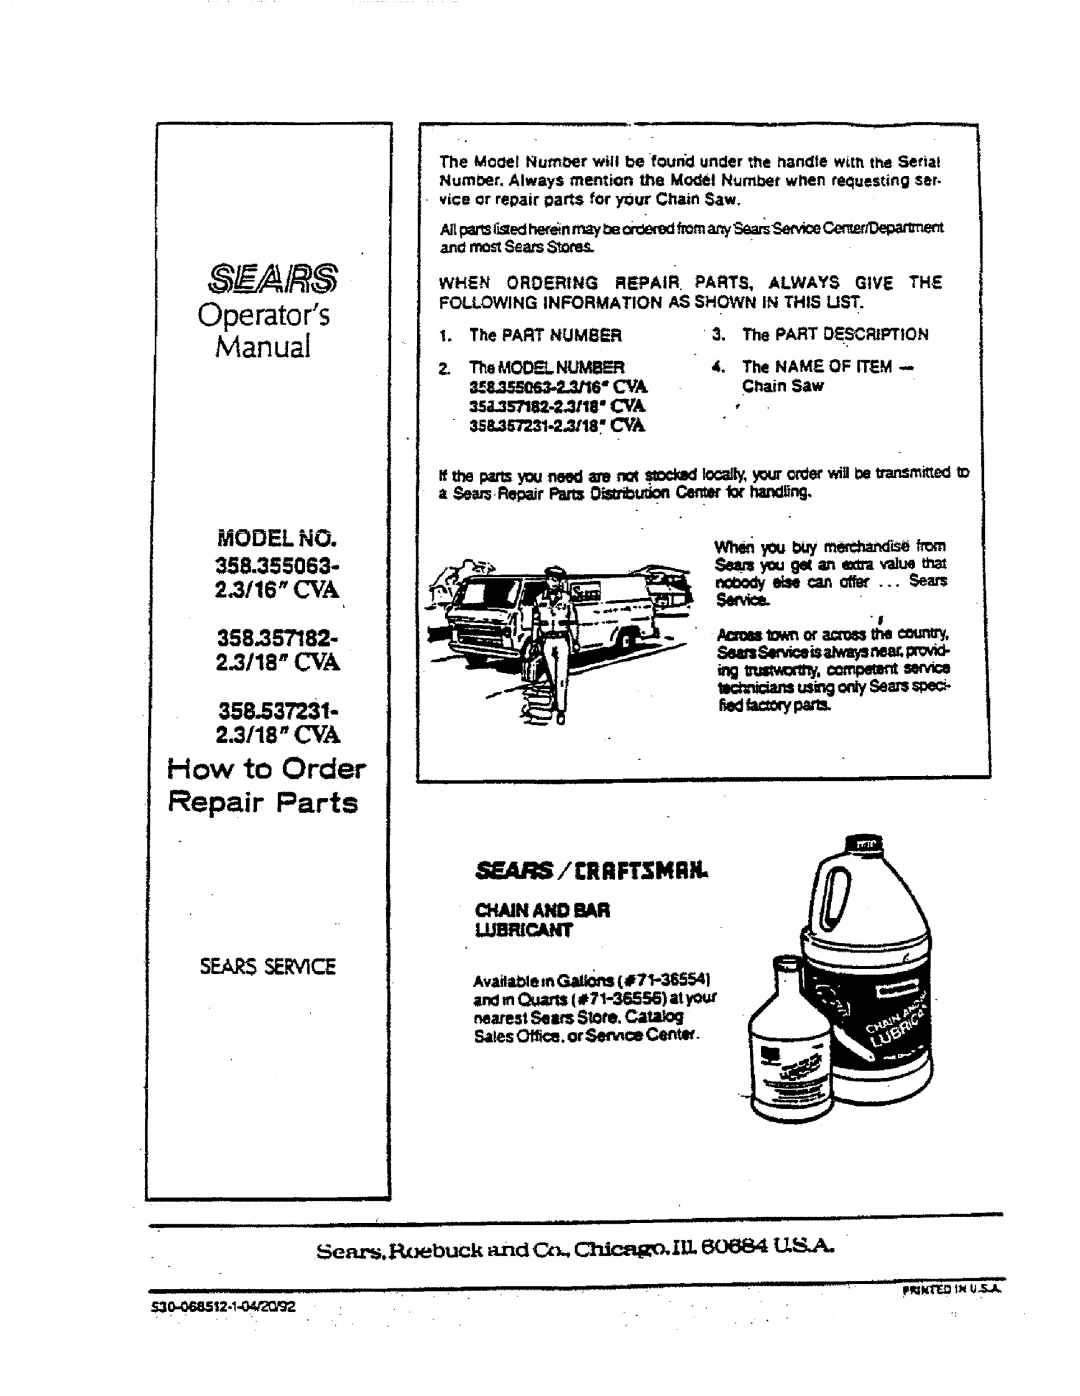 Sears 358.155063 manual How to Order, Repair Parts, 358.537231- 2.3118 CYA, SEA/ / i RRFTSMRtL, S RS RVlCE, a a=.Re r Parts 